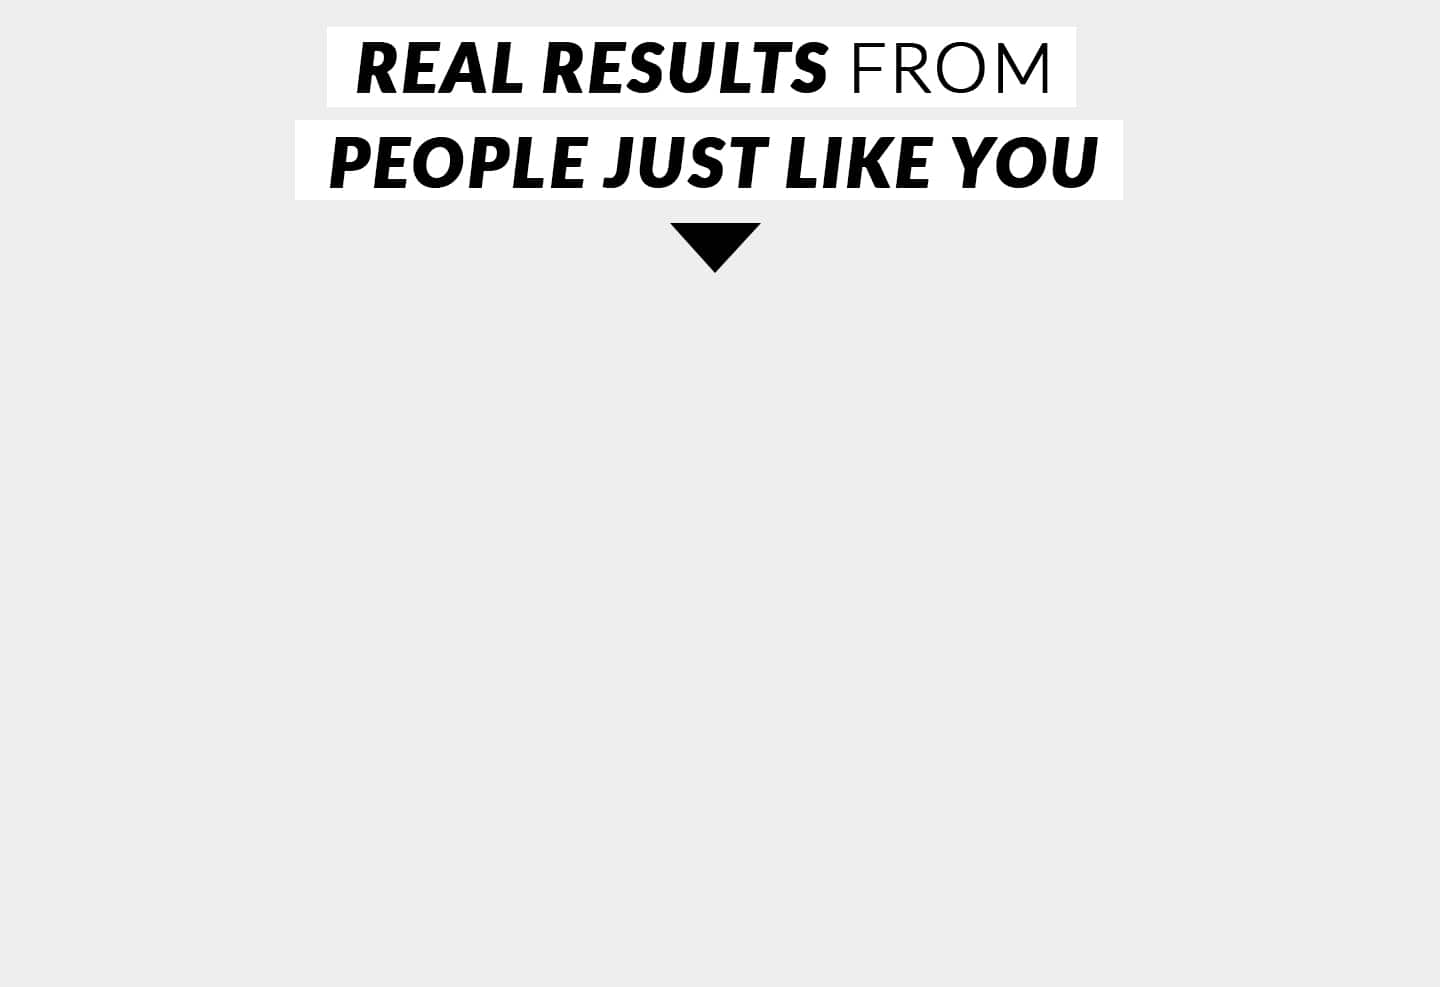 REAL RESULTS FROM PEOPLE JUST LIKE YOU